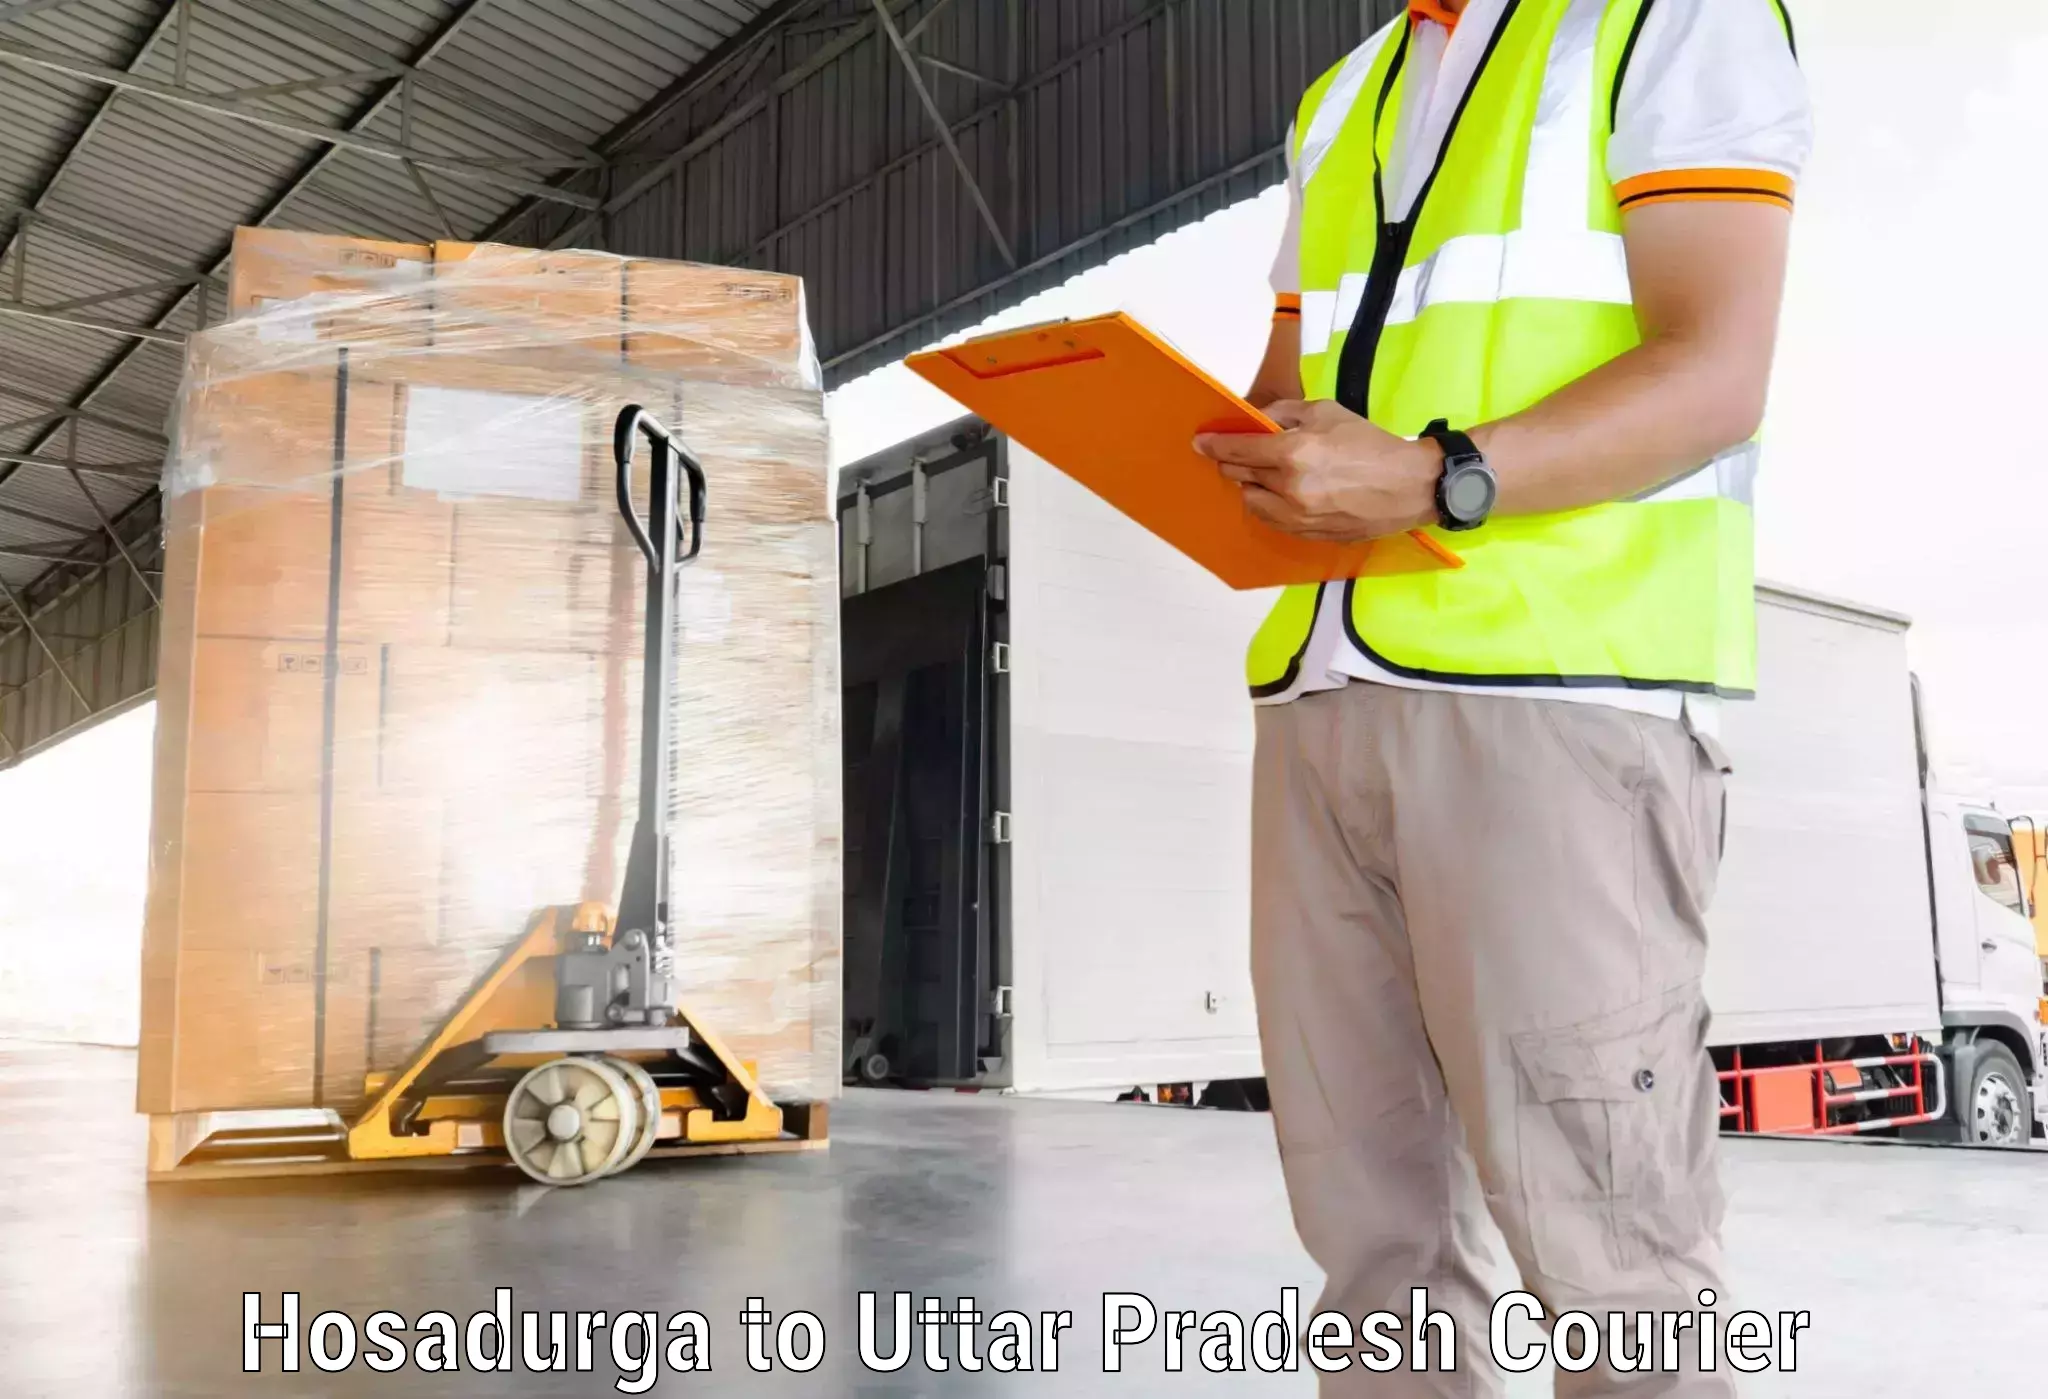 Seamless shipping experience in Hosadurga to Sultanpur